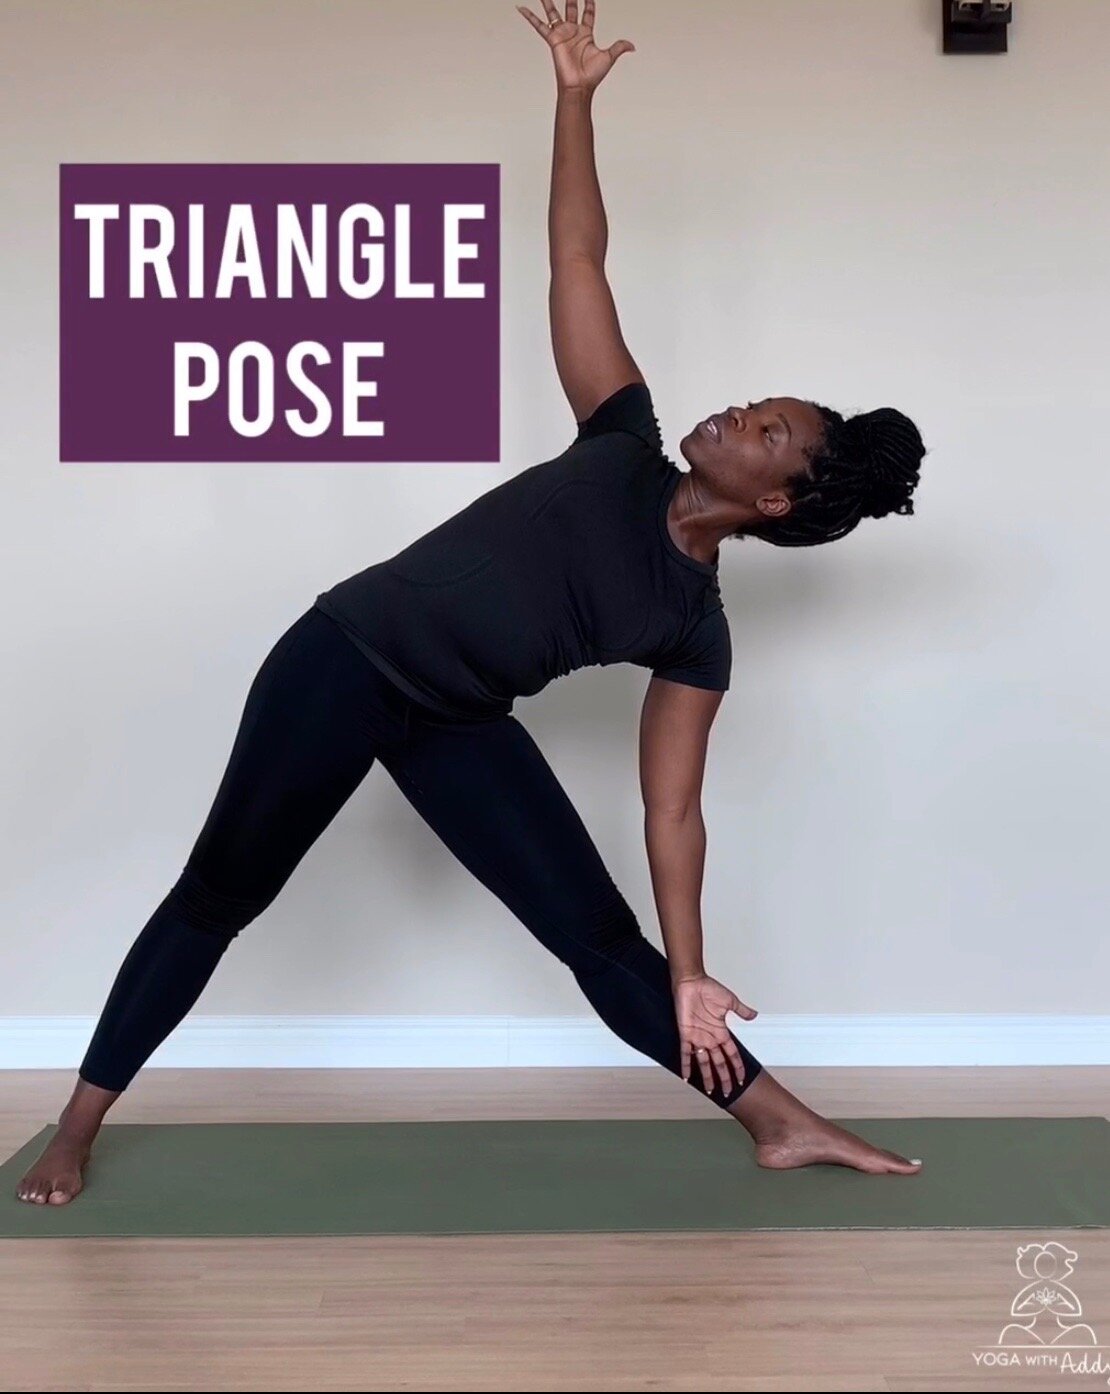 Master the Triangle Pose with These Easy Steps